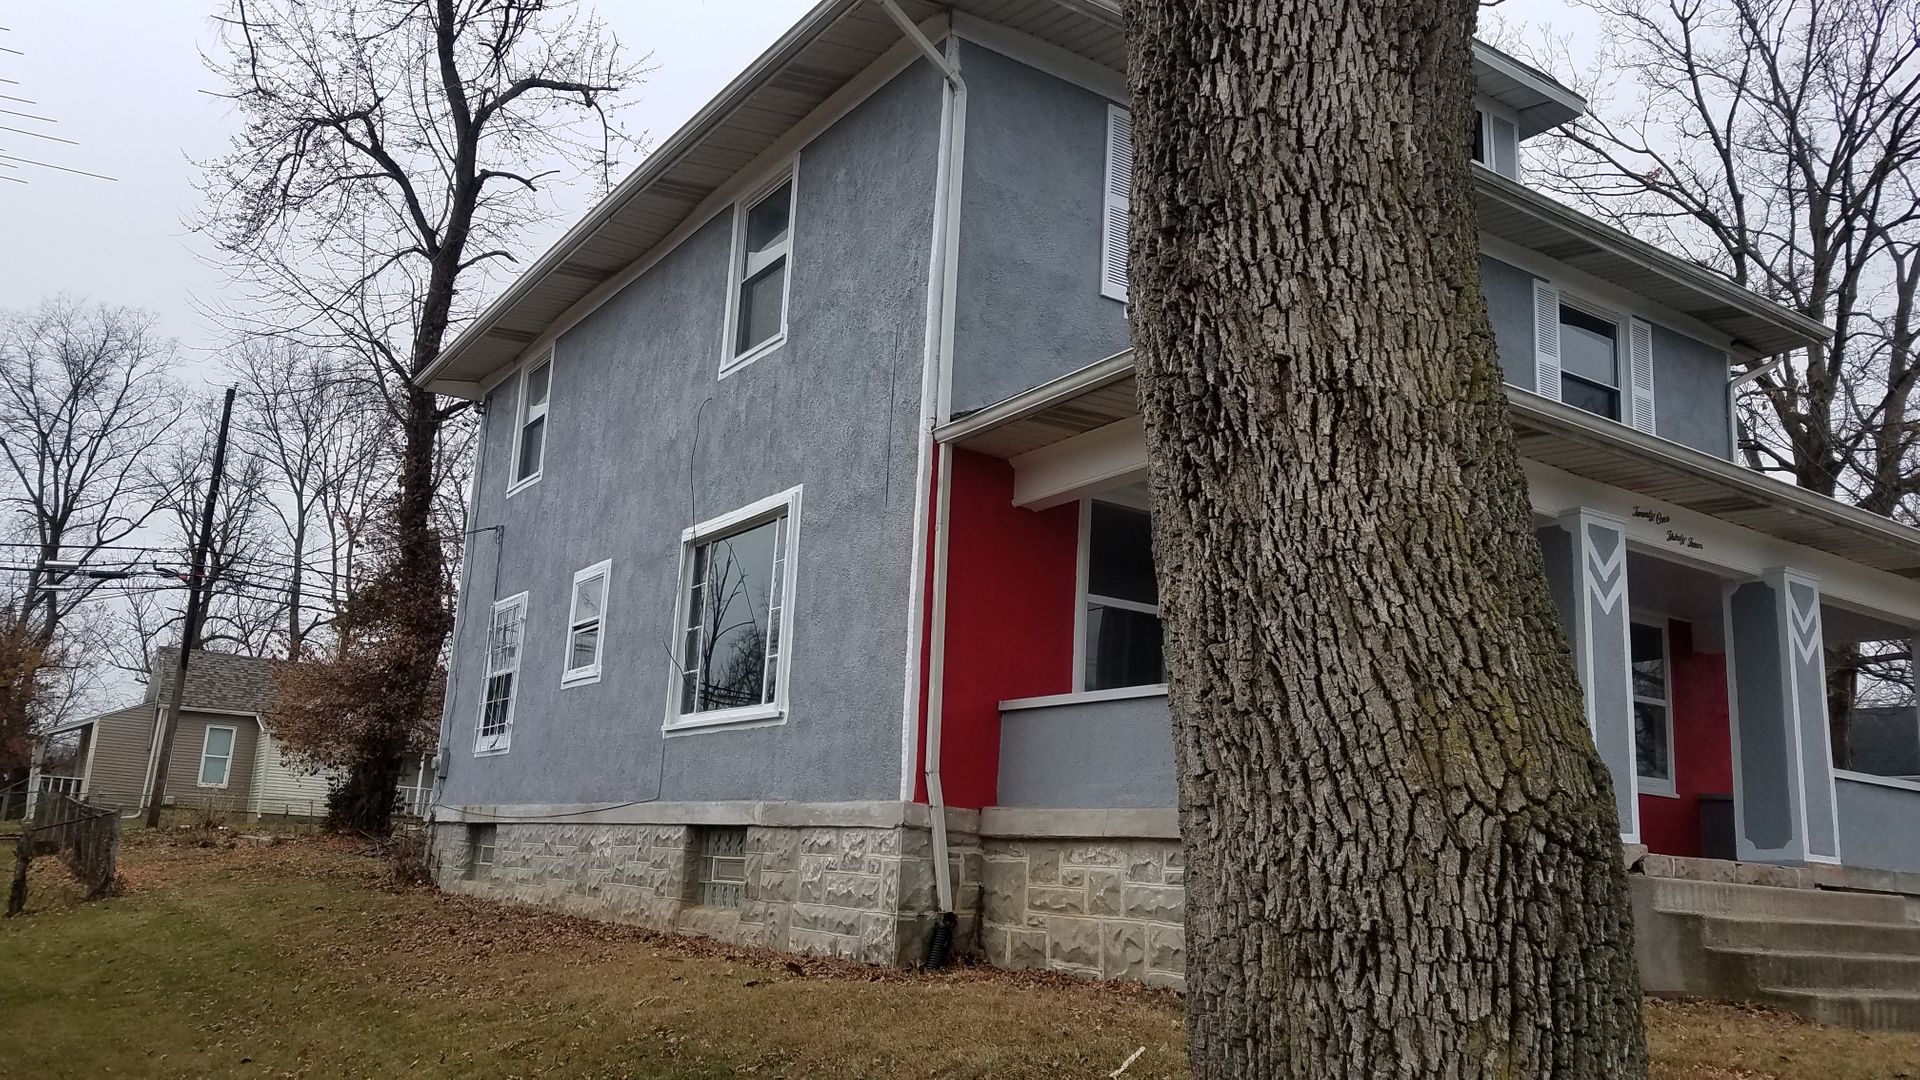 3124 LAKEVIEW AVE - 4 bedroom - 2.5 bath, $1400